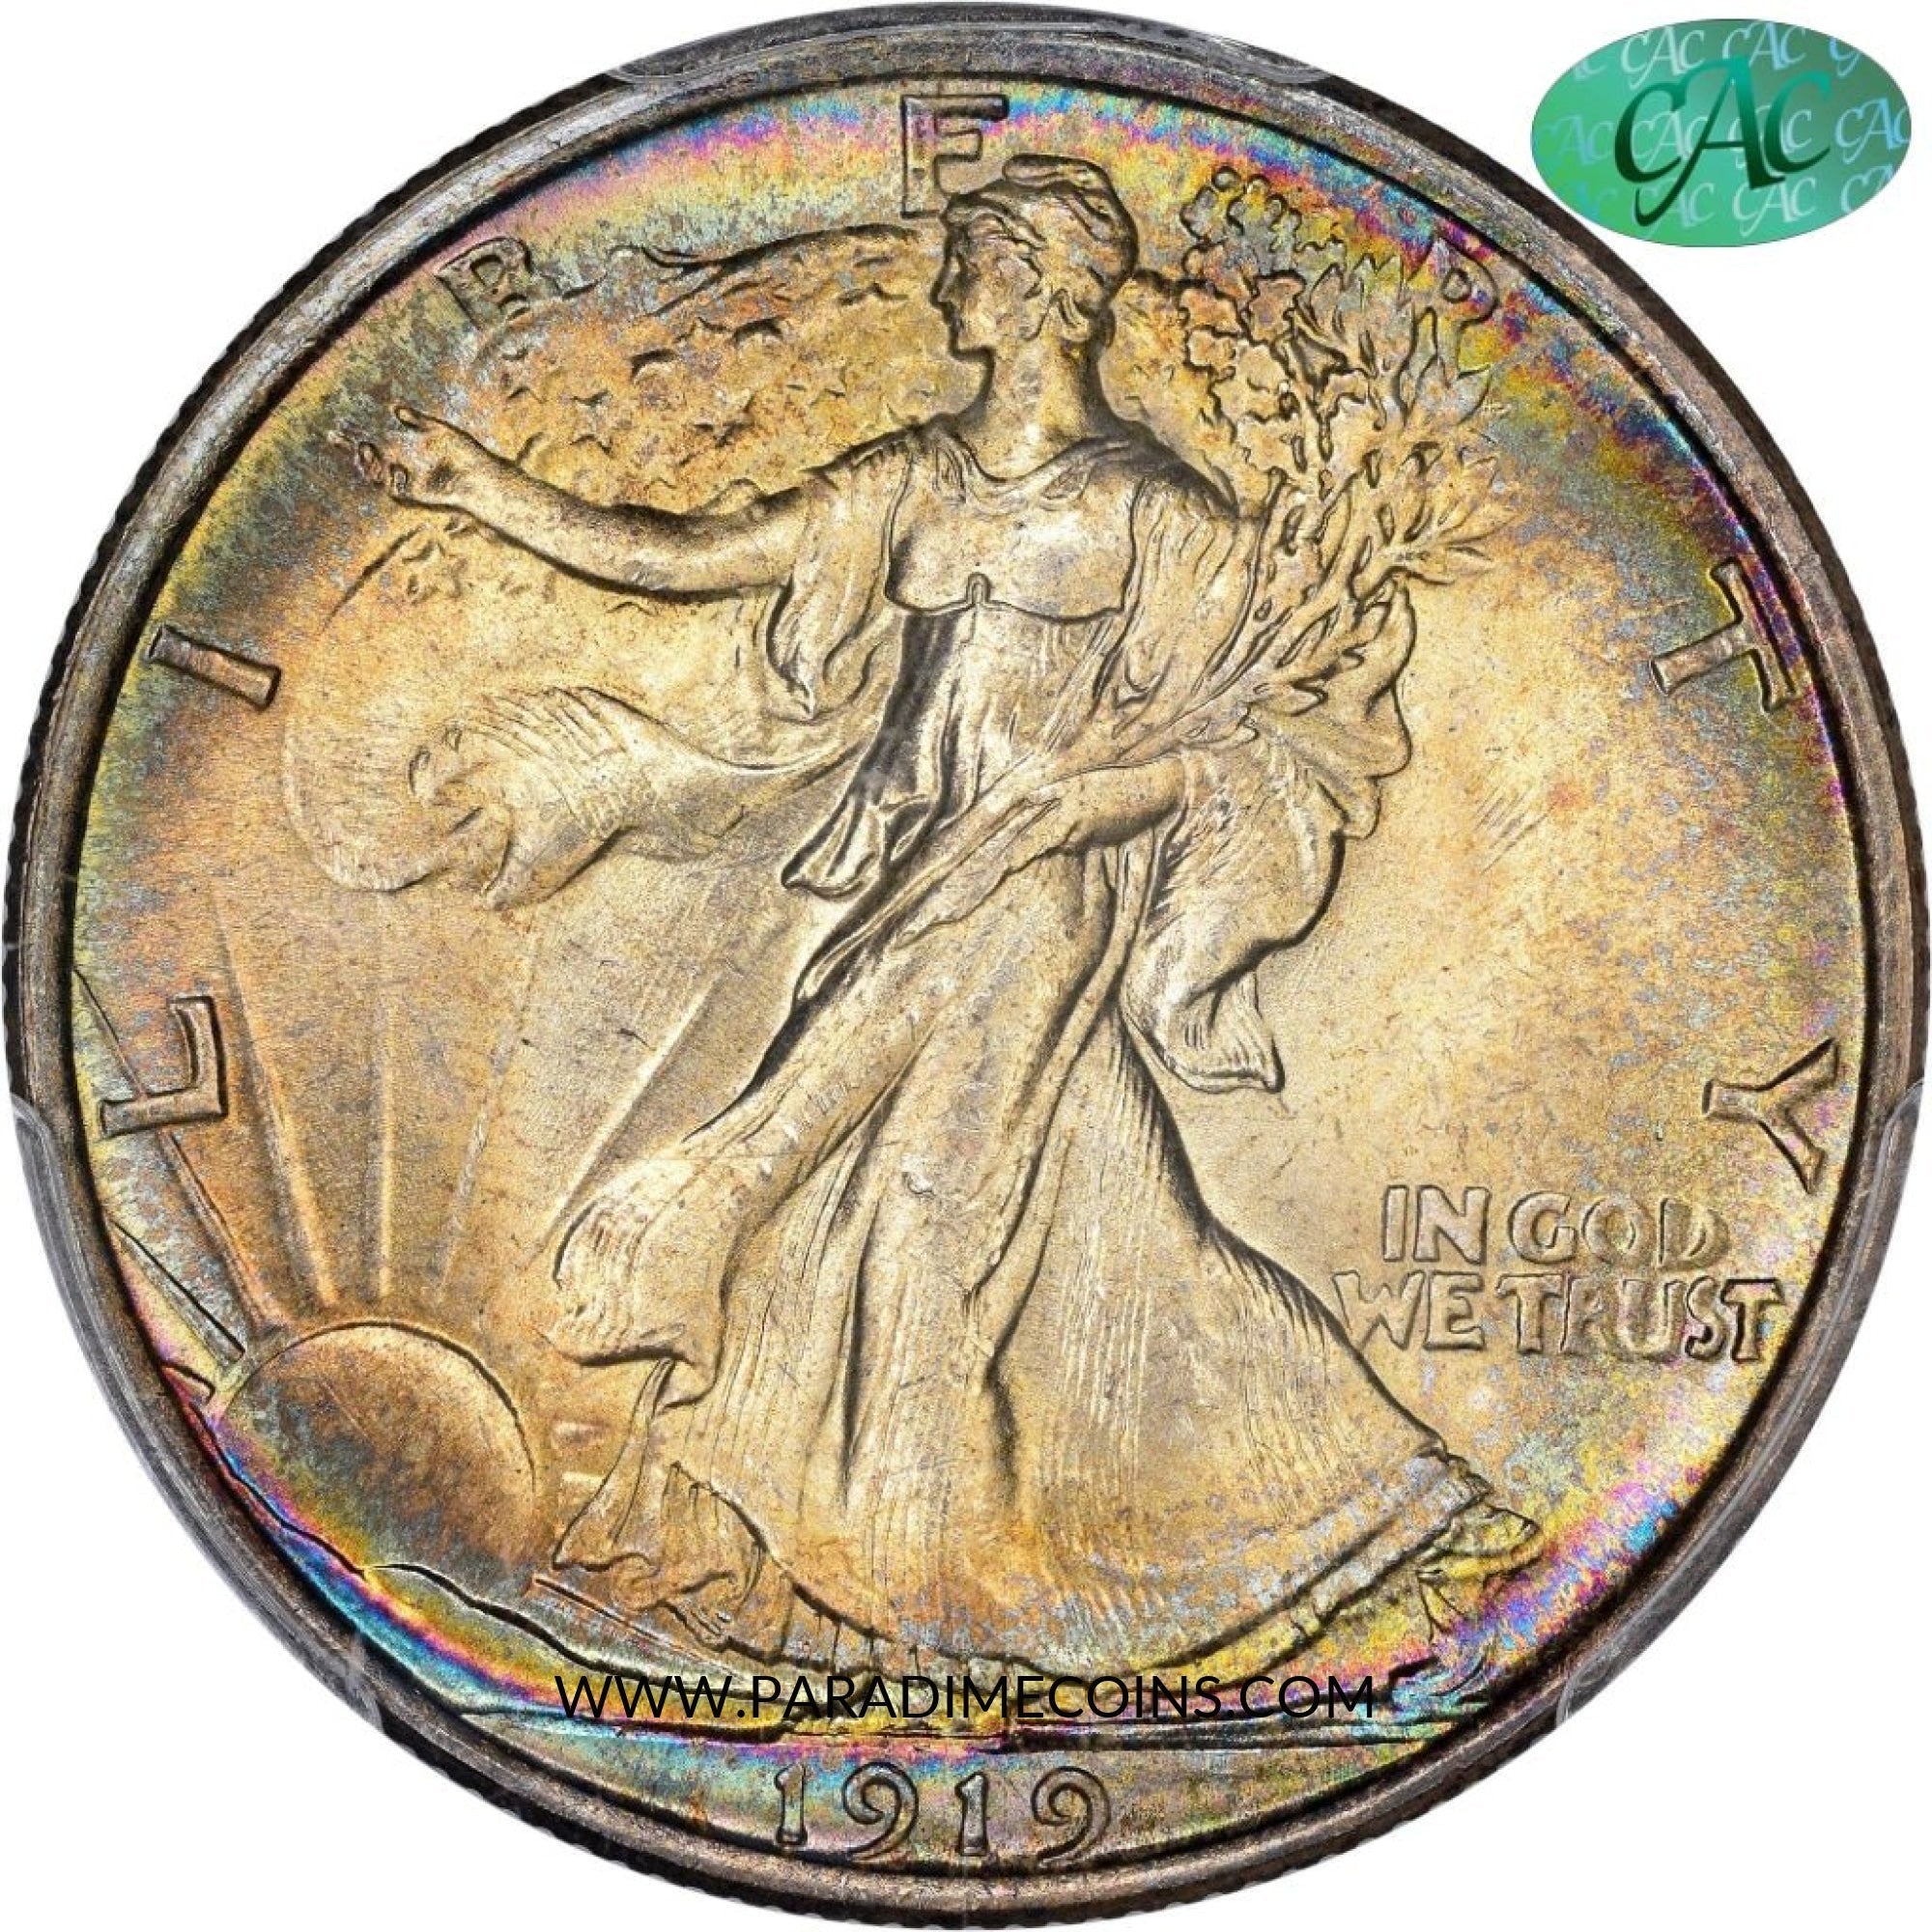 1919 50C MS66 PCGS CAC ex. Col. Green-Newman - Paradime Coins | PCGS NGC CACG CAC Rare US Numismatic Coins For Sale